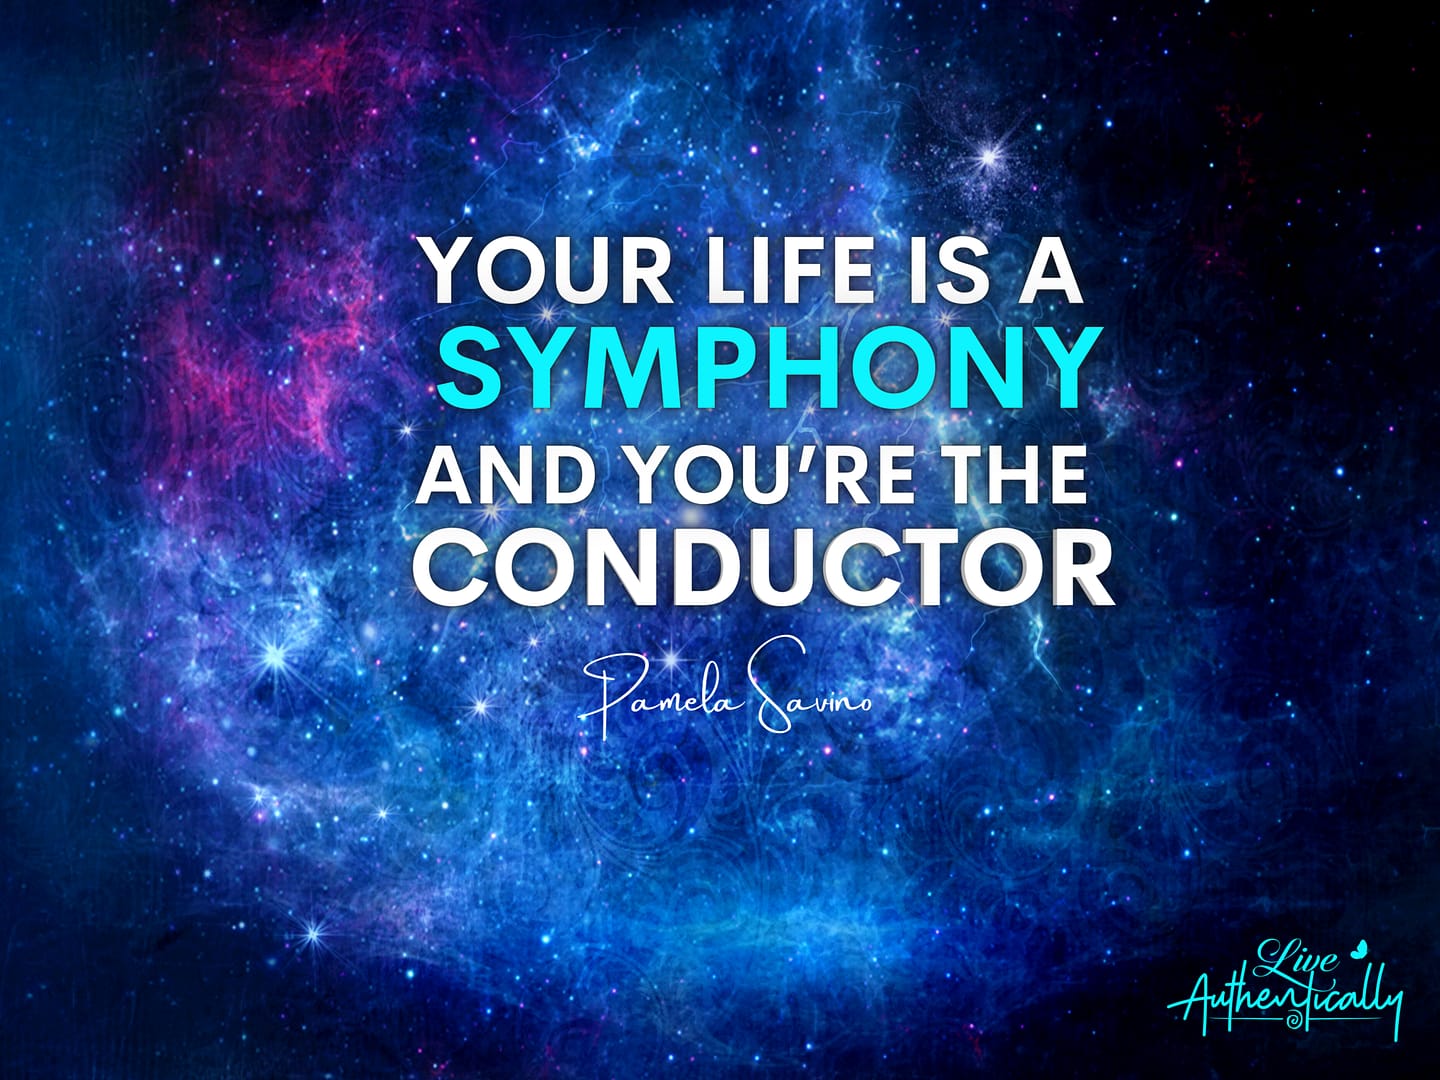 Your Life is a Symphony and You’re the Conductor